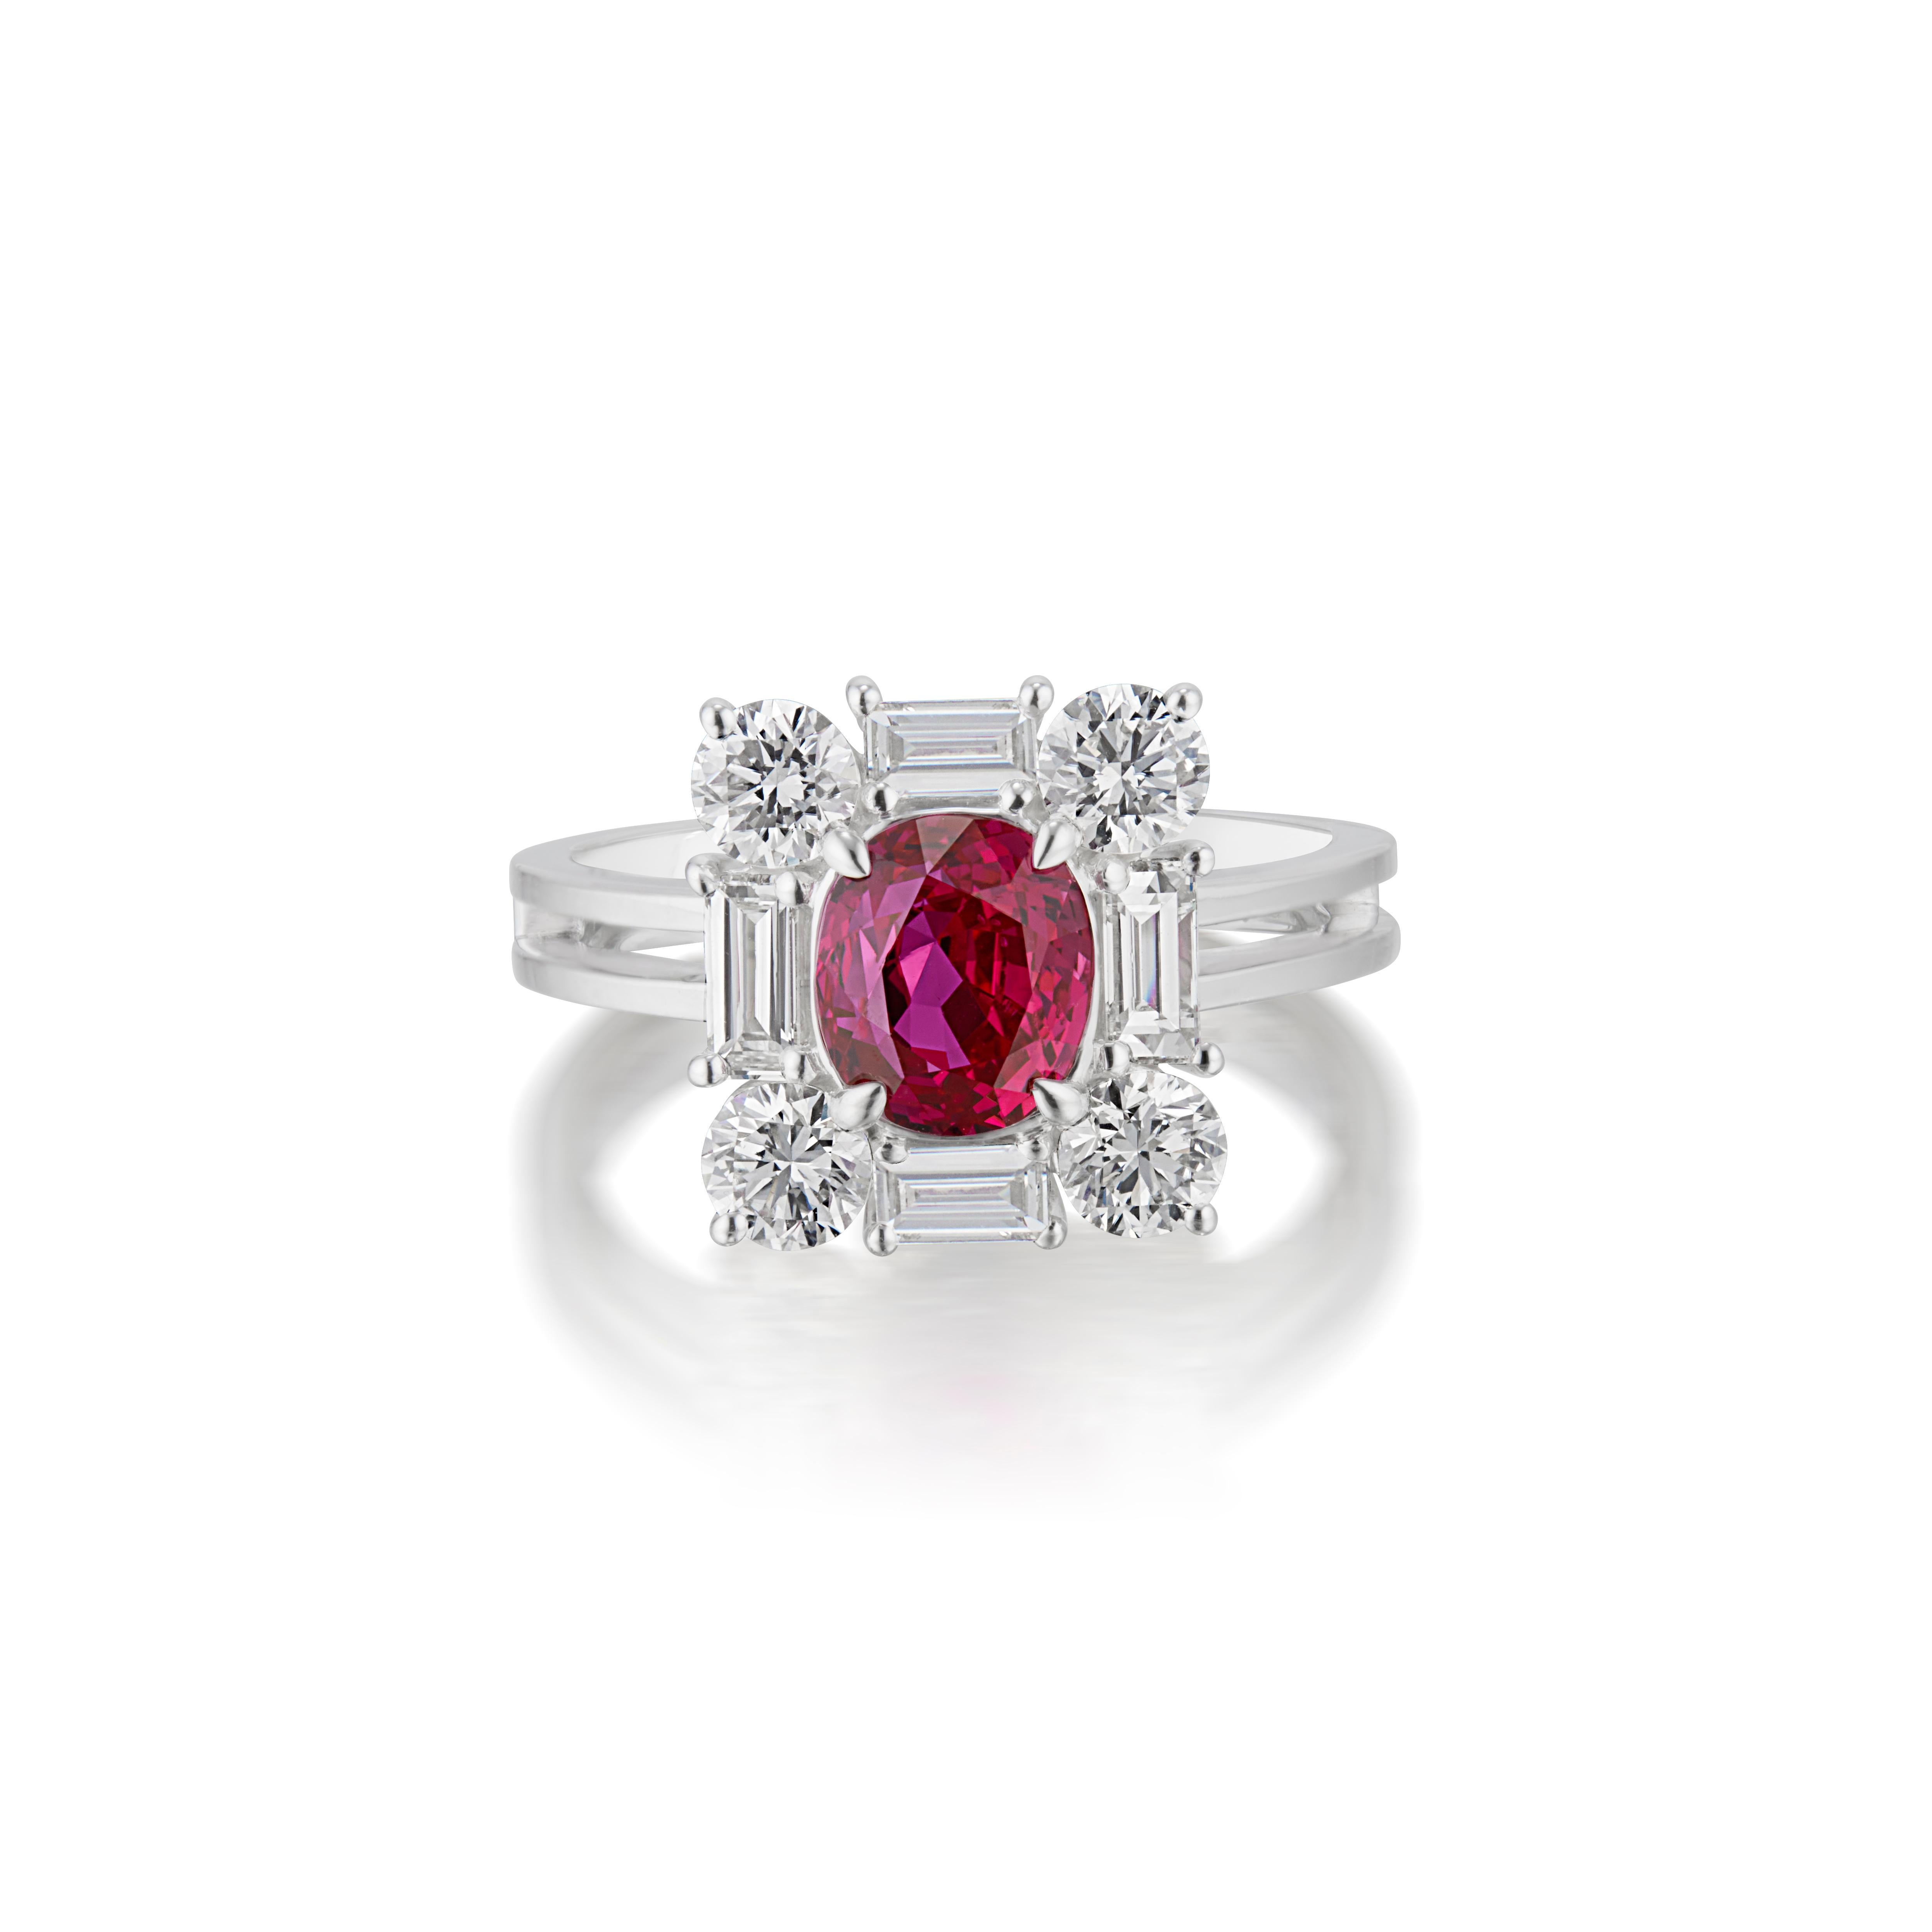 Platinum 
8 Diamonds, 0.61 Carats
1 No-Heat Burmese Ruby, 2.13 Carats
Gubelin Lab Certificated, Pink-Red Color 

This ruby ring captures the glamour of a bygone era. This extraordinary piece showcases a rare 2.13 carat Burmese ruby with vibrant pink